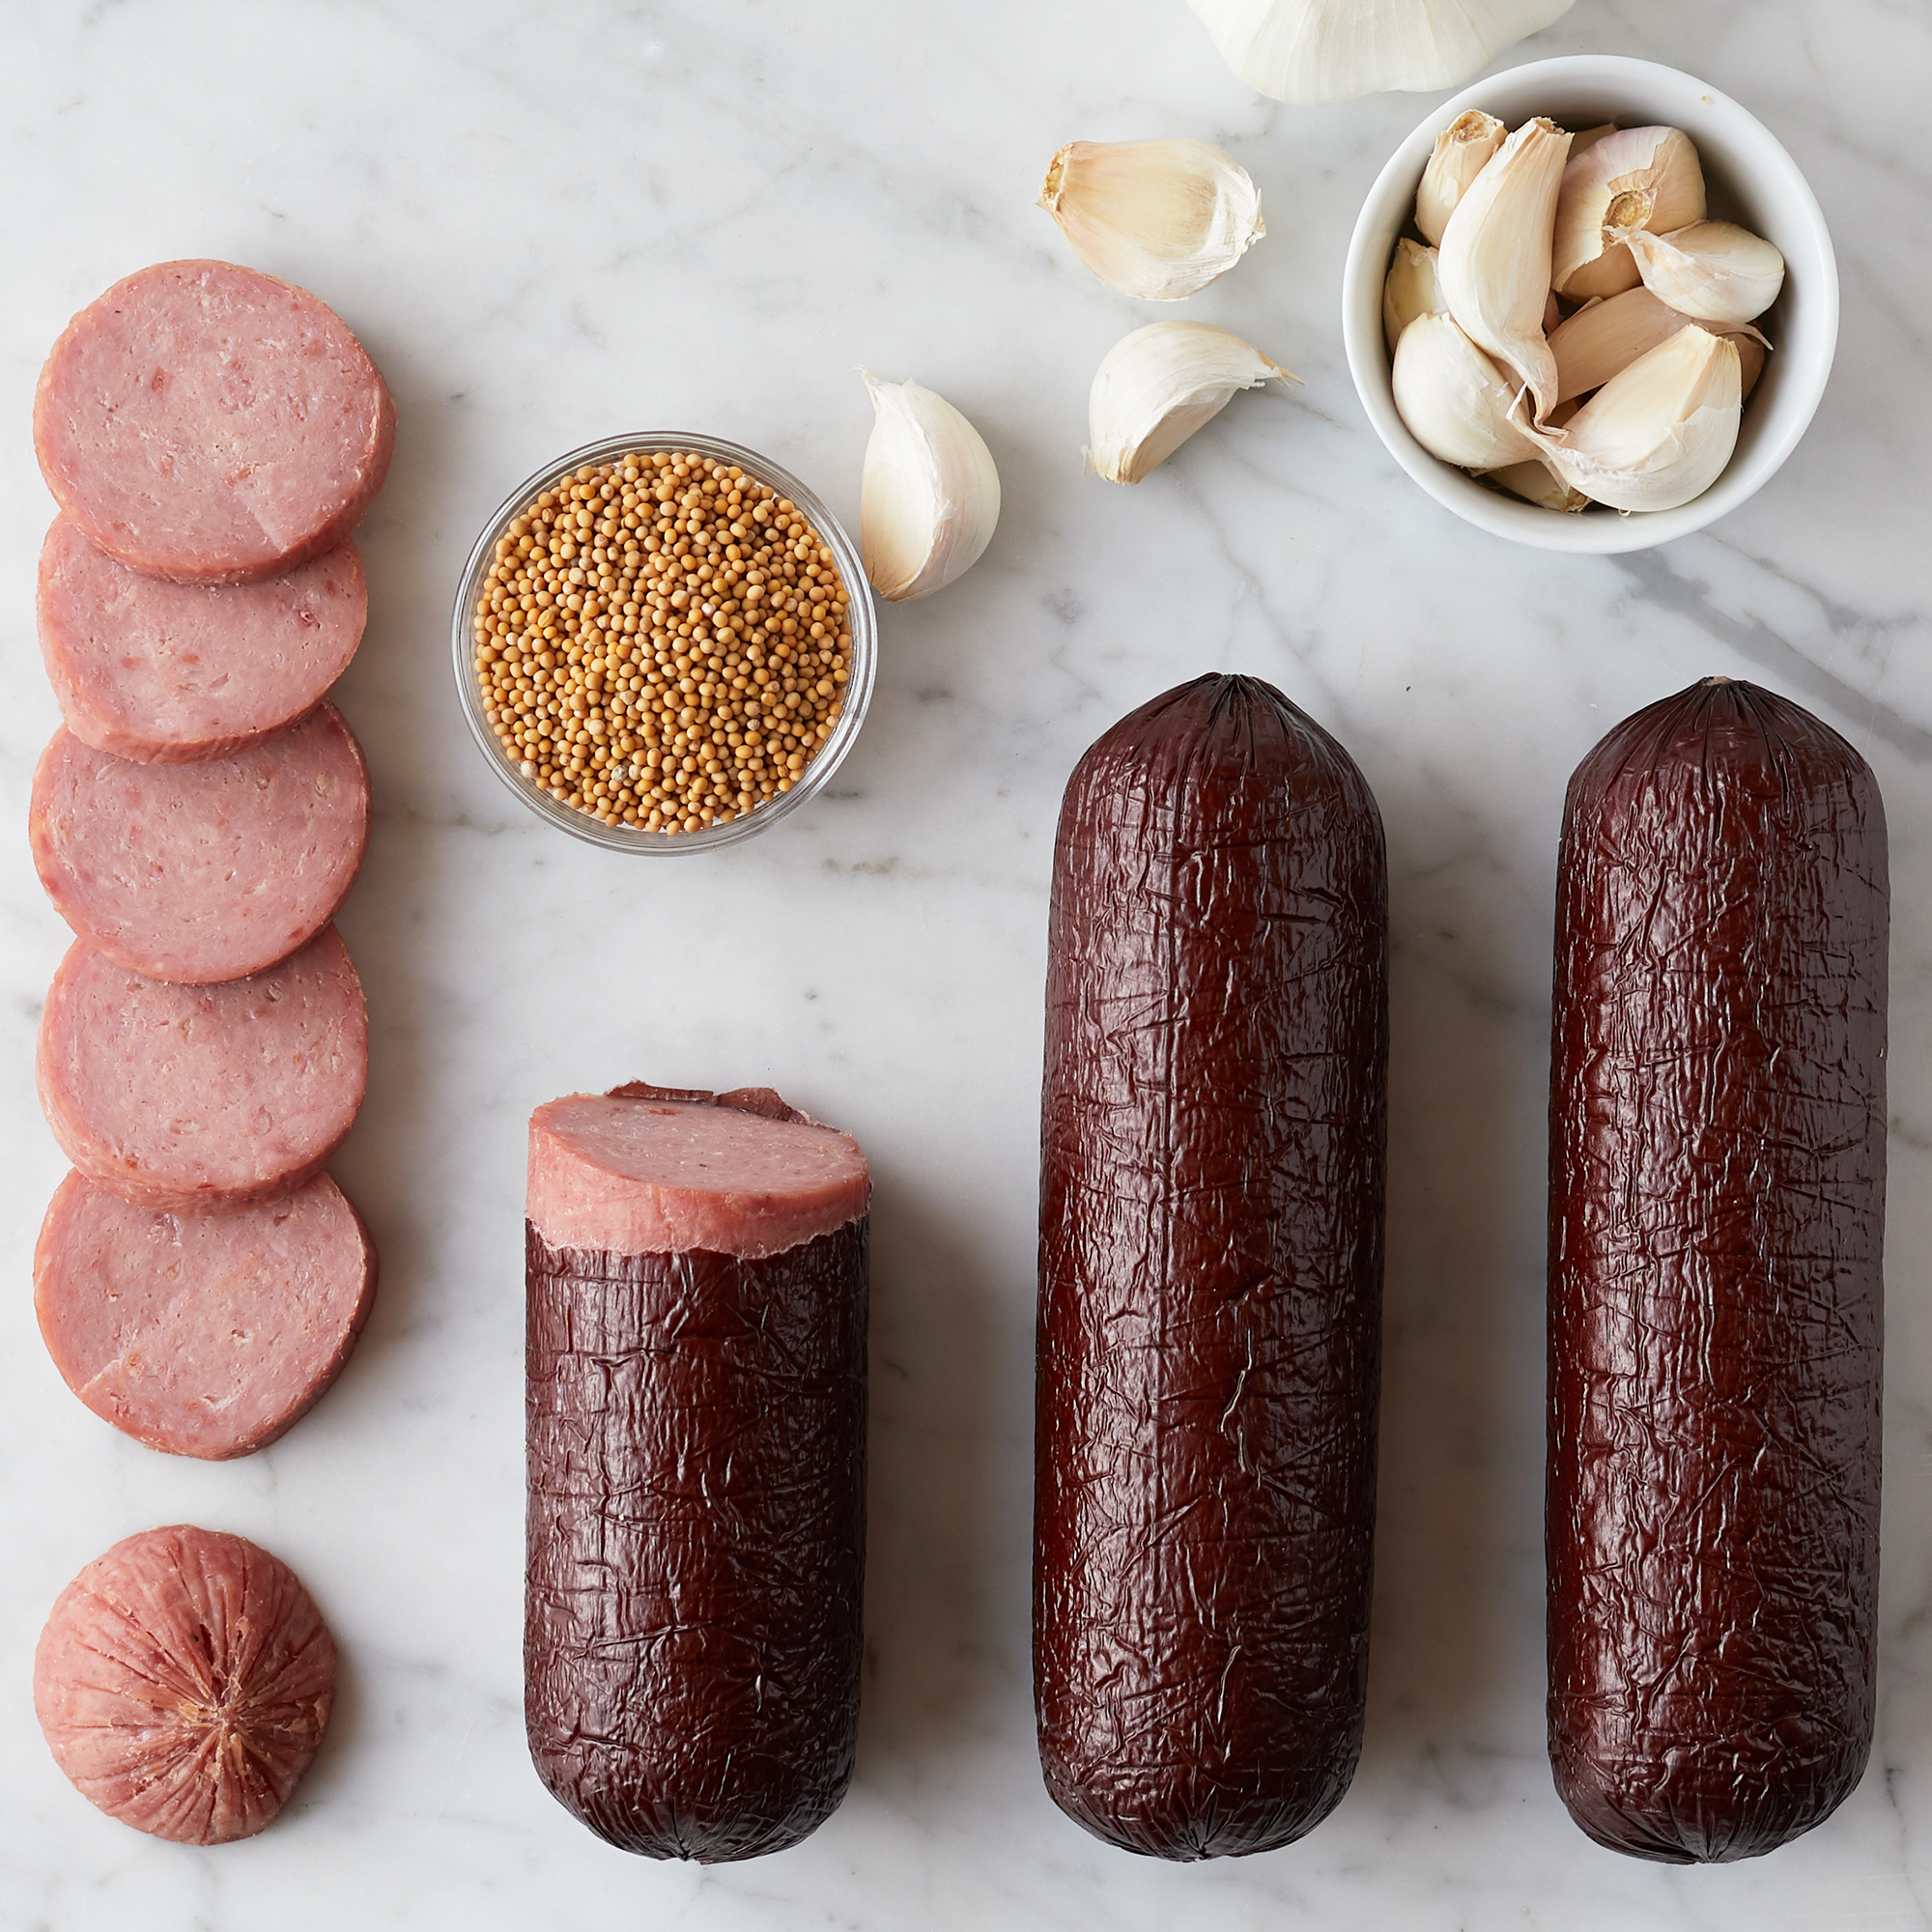 https://www.hickoryfarms.com/on/demandware.static/-/Sites-Web-Master-Catalog/default/dw4131a47a/images/products/hickory-farms-savory-turkey-summer-sausage-032029-2.jpg